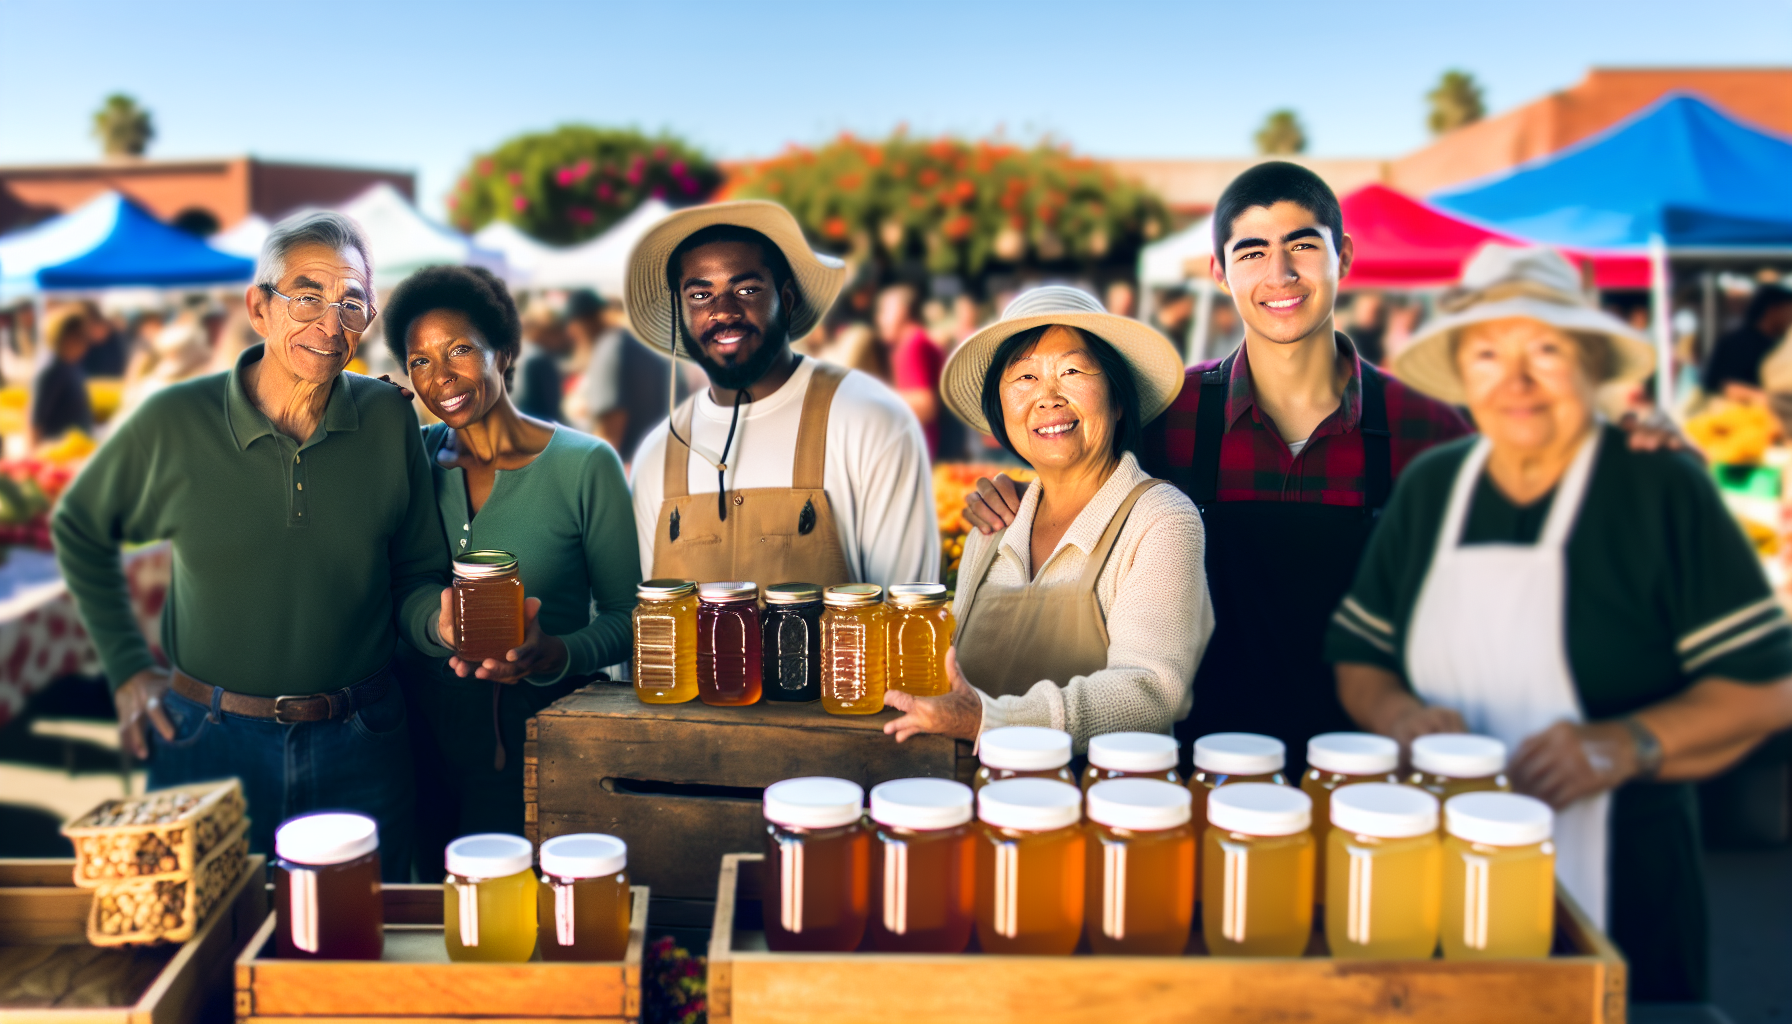 Local beekeepers selling jars of honey at a farmers' market